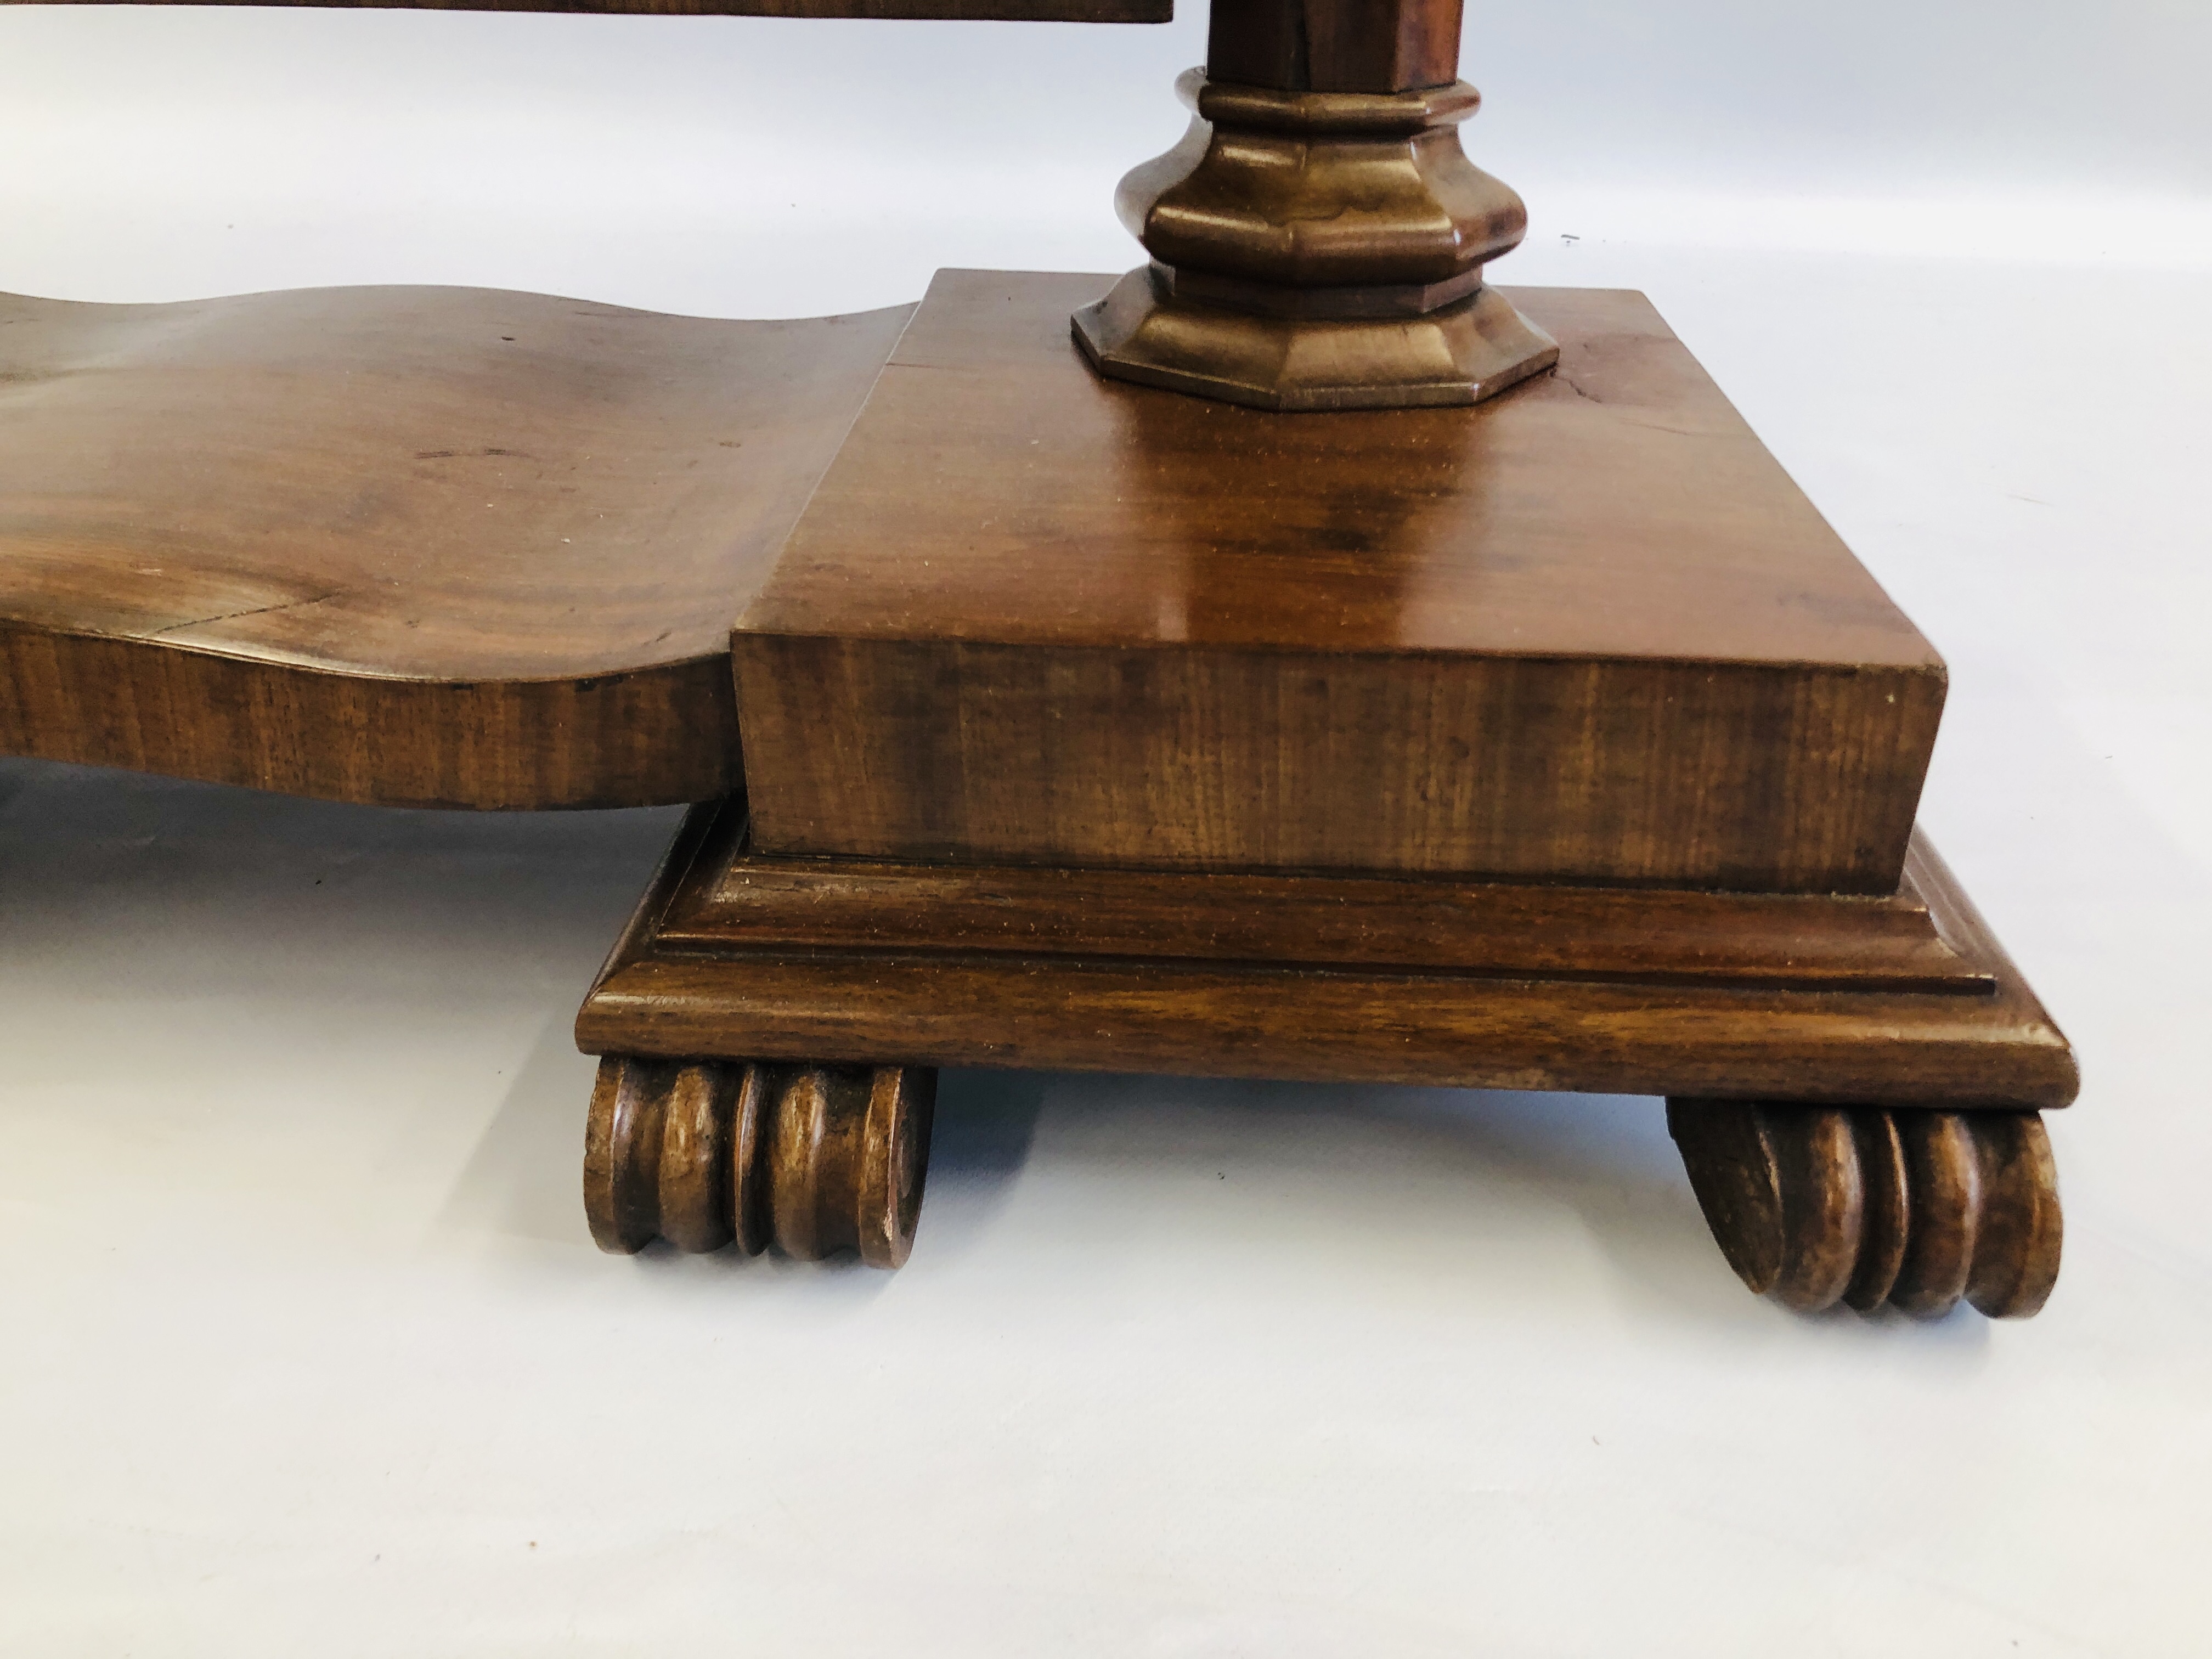 AN ANTIQUE MAHOGANY TWIN PILLAR DRESSING MIRROR ON SCROLLED FEET SUPPORTS - W 75CM X H 85CM. - Image 4 of 6